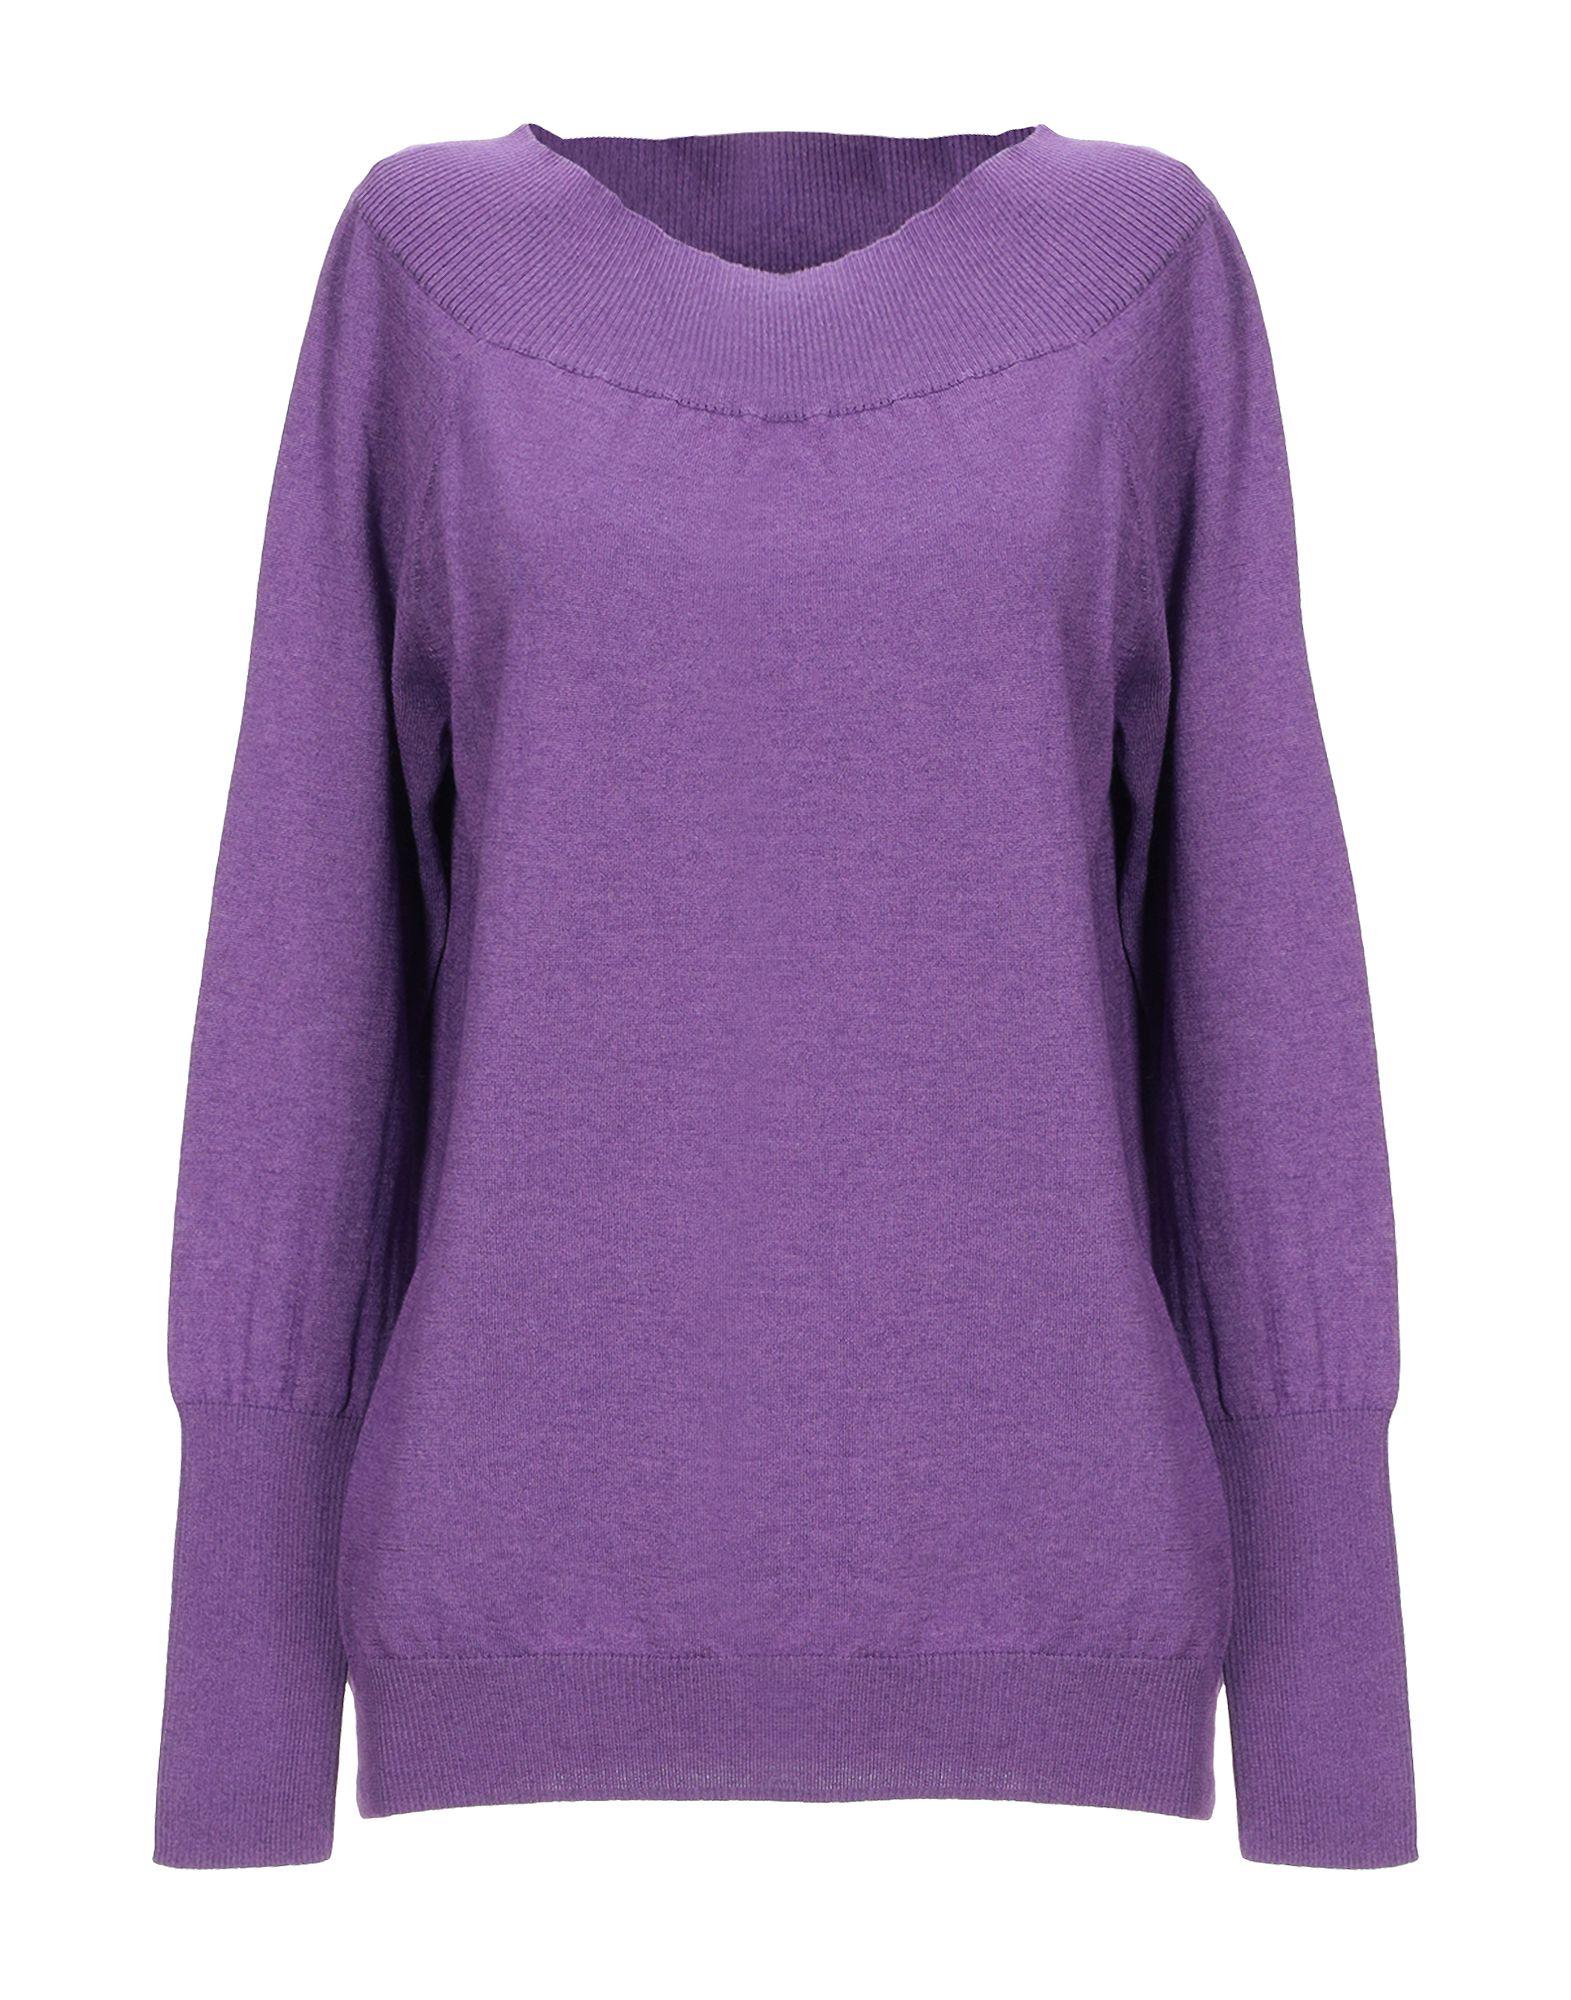 Snobby Sheep Sweater in Purple - Lyst